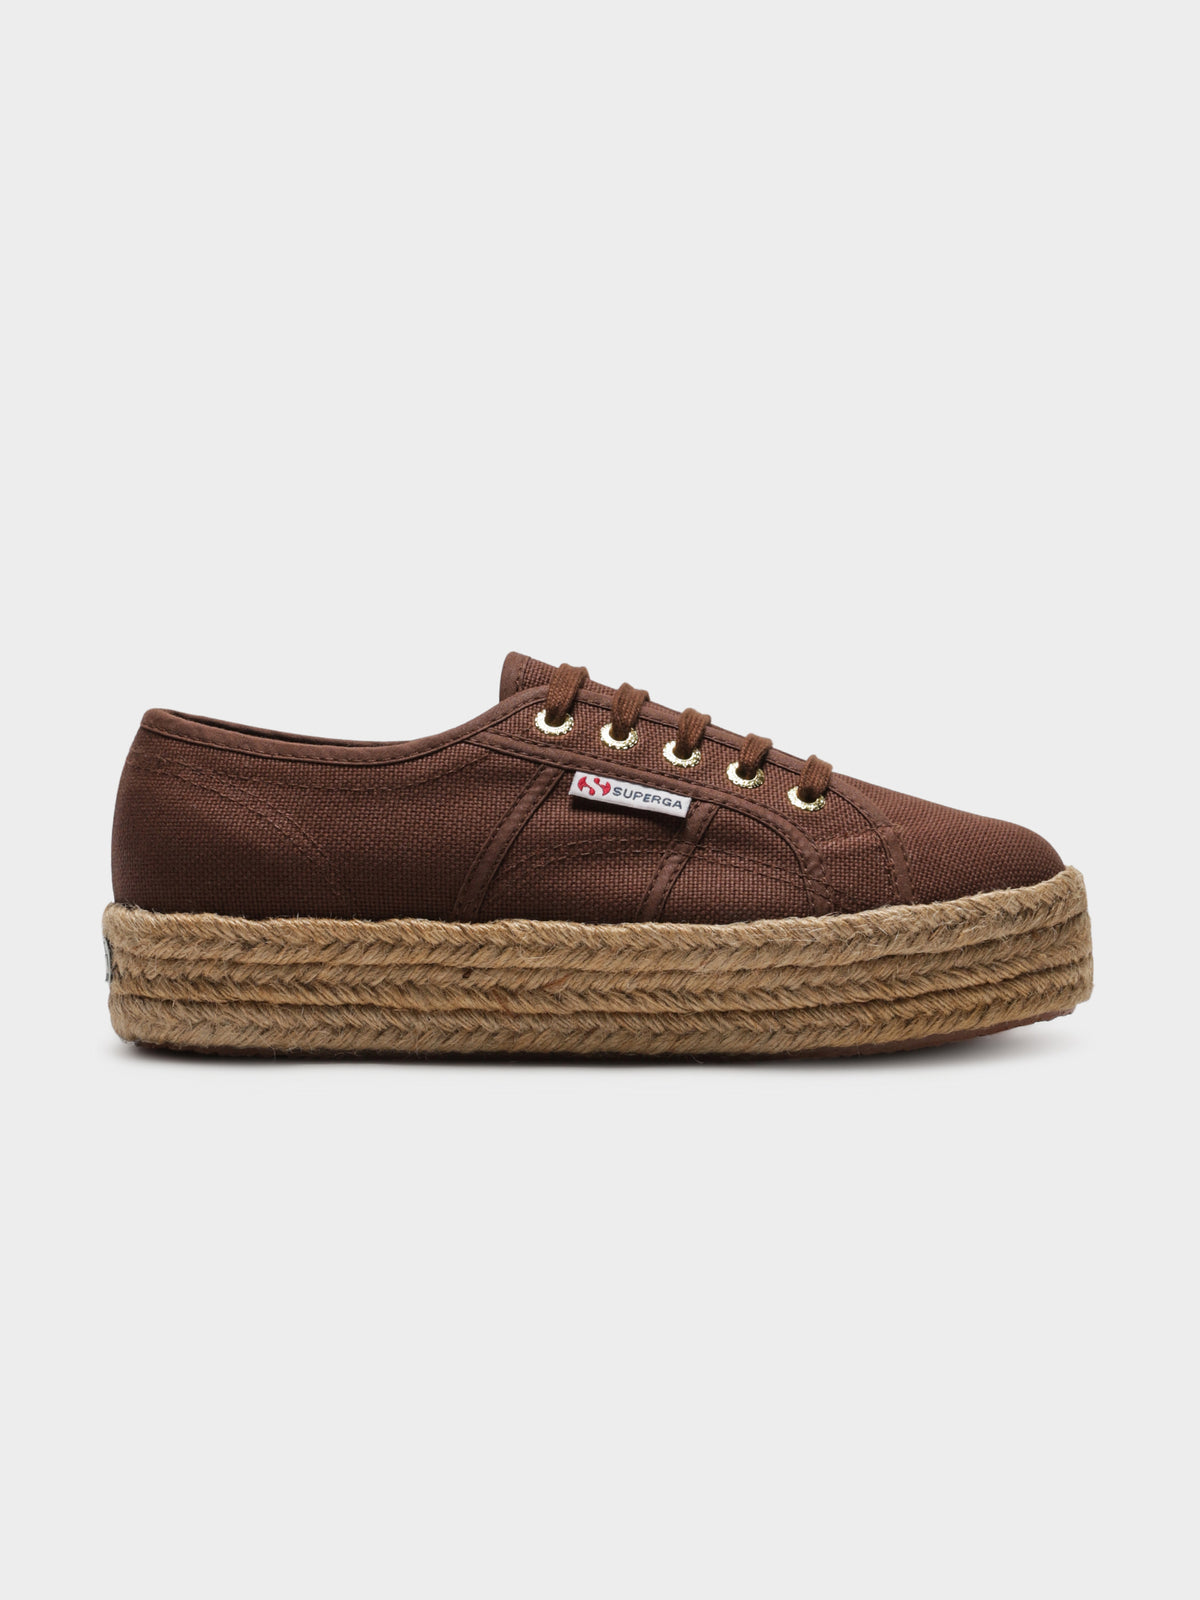 2730 Cotropew Sneakers in Brown Castagna